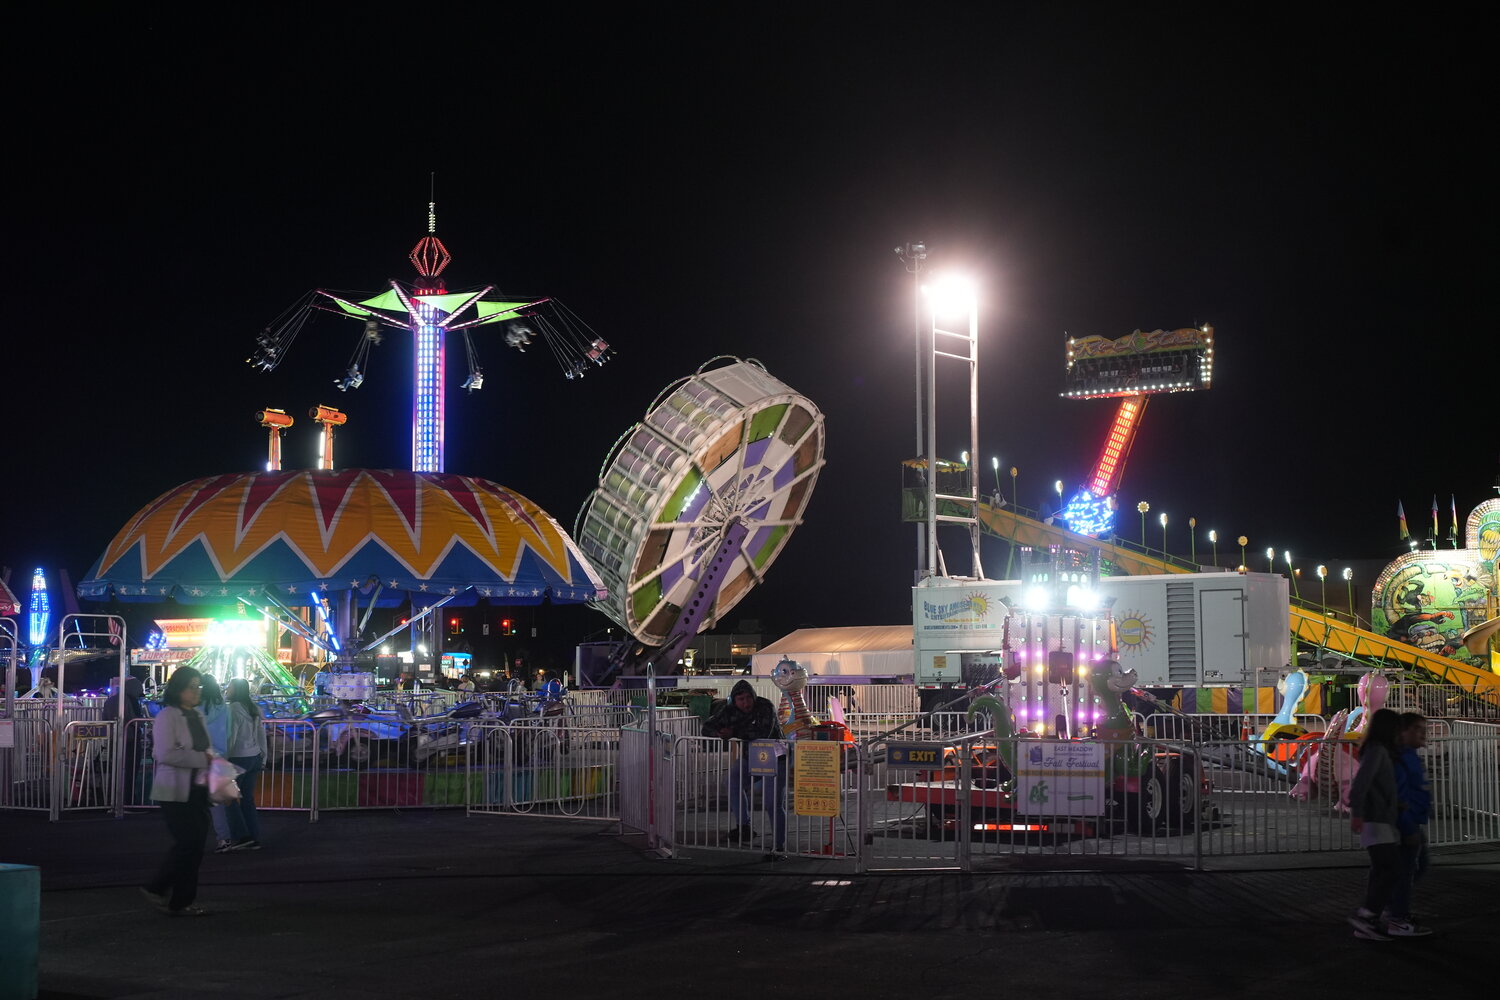 The fair took place in the parking lot of the Nassau Coliseum.